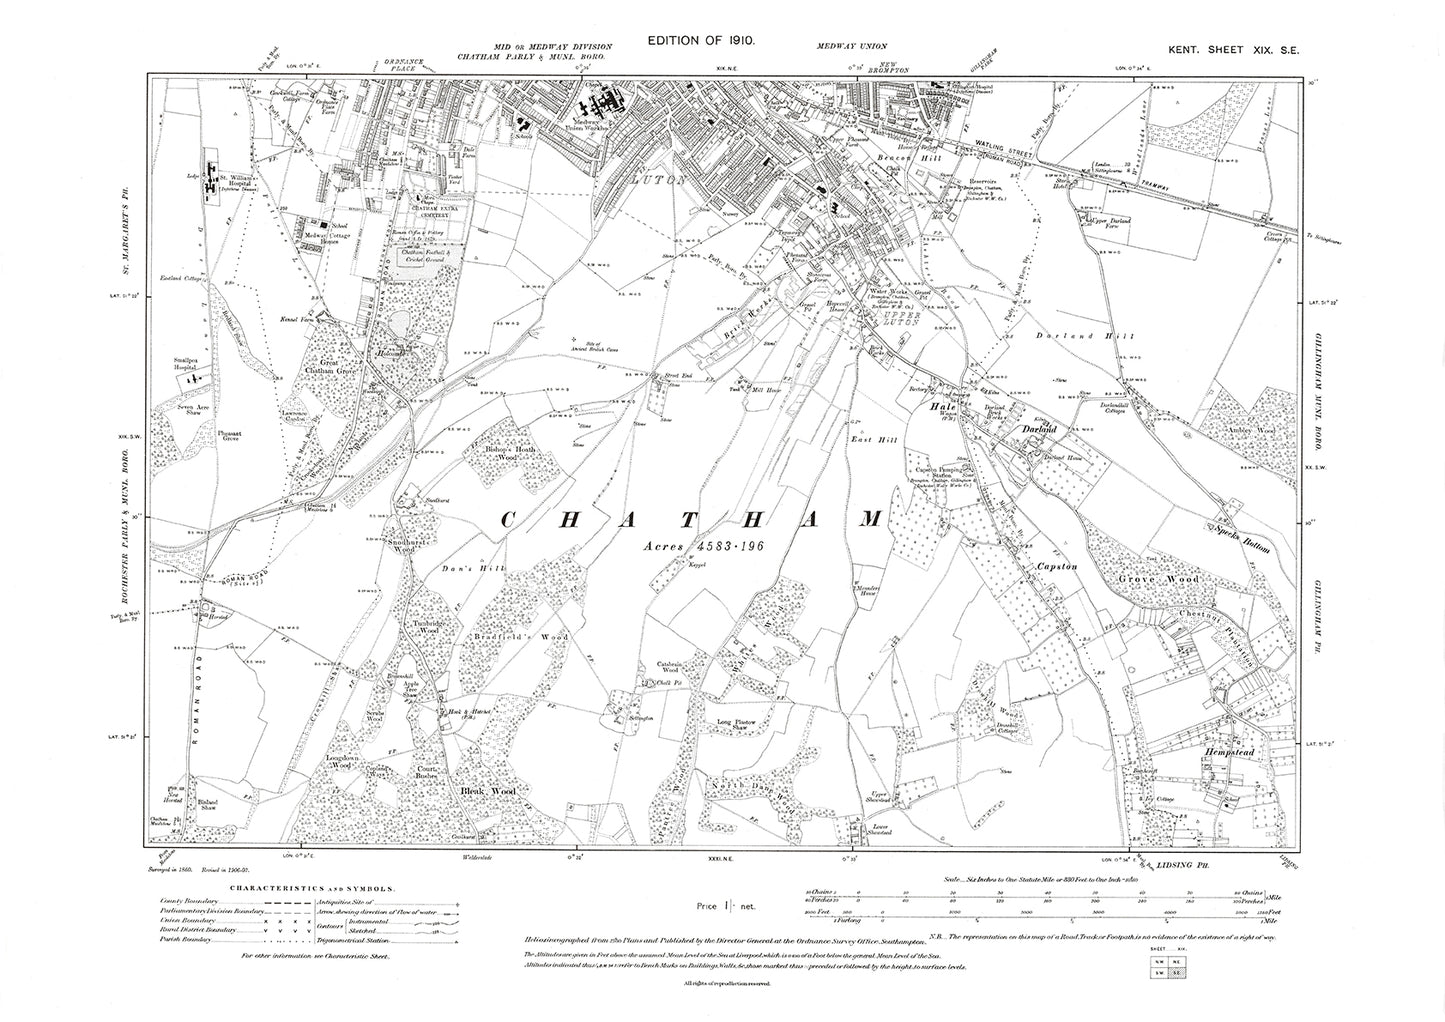 Luton, Hail, Hampsted, old map Kent 1910: 19SE